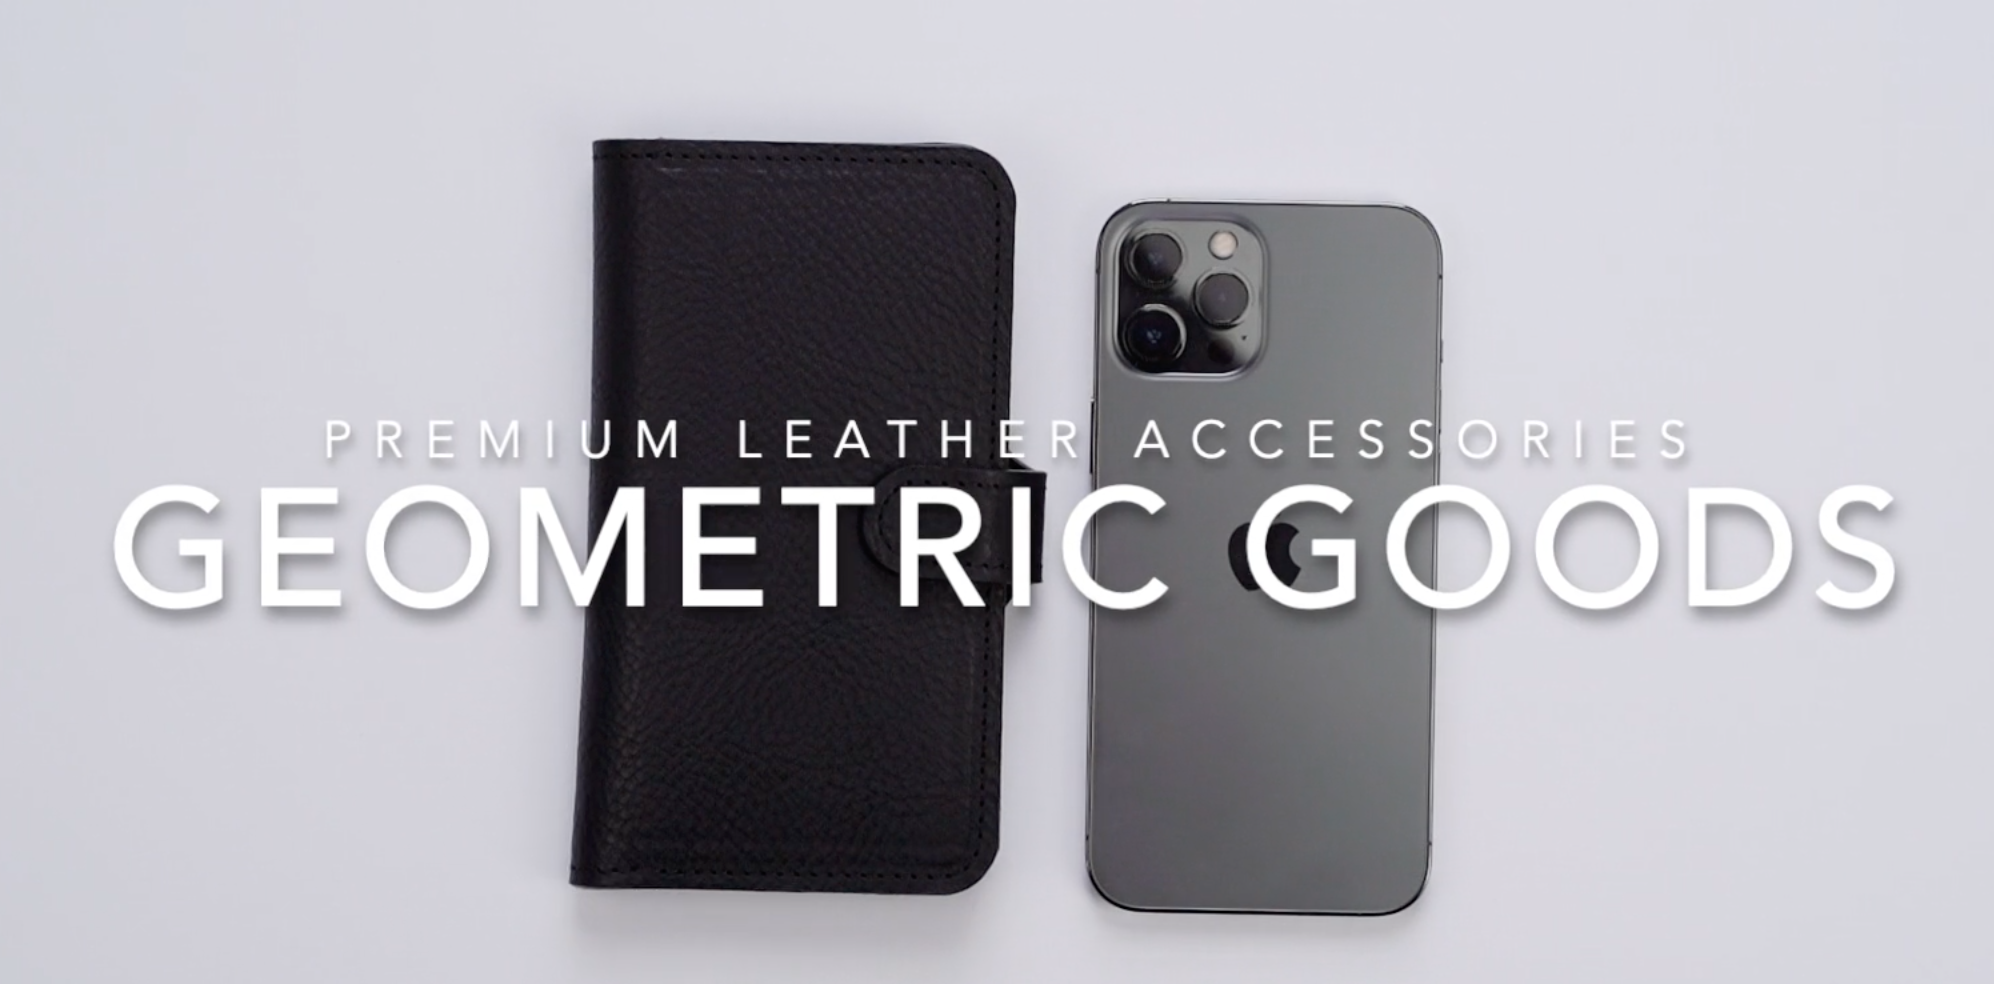 Load video: Leather MagSafe folio wallet 4.0 by Geometric Goods